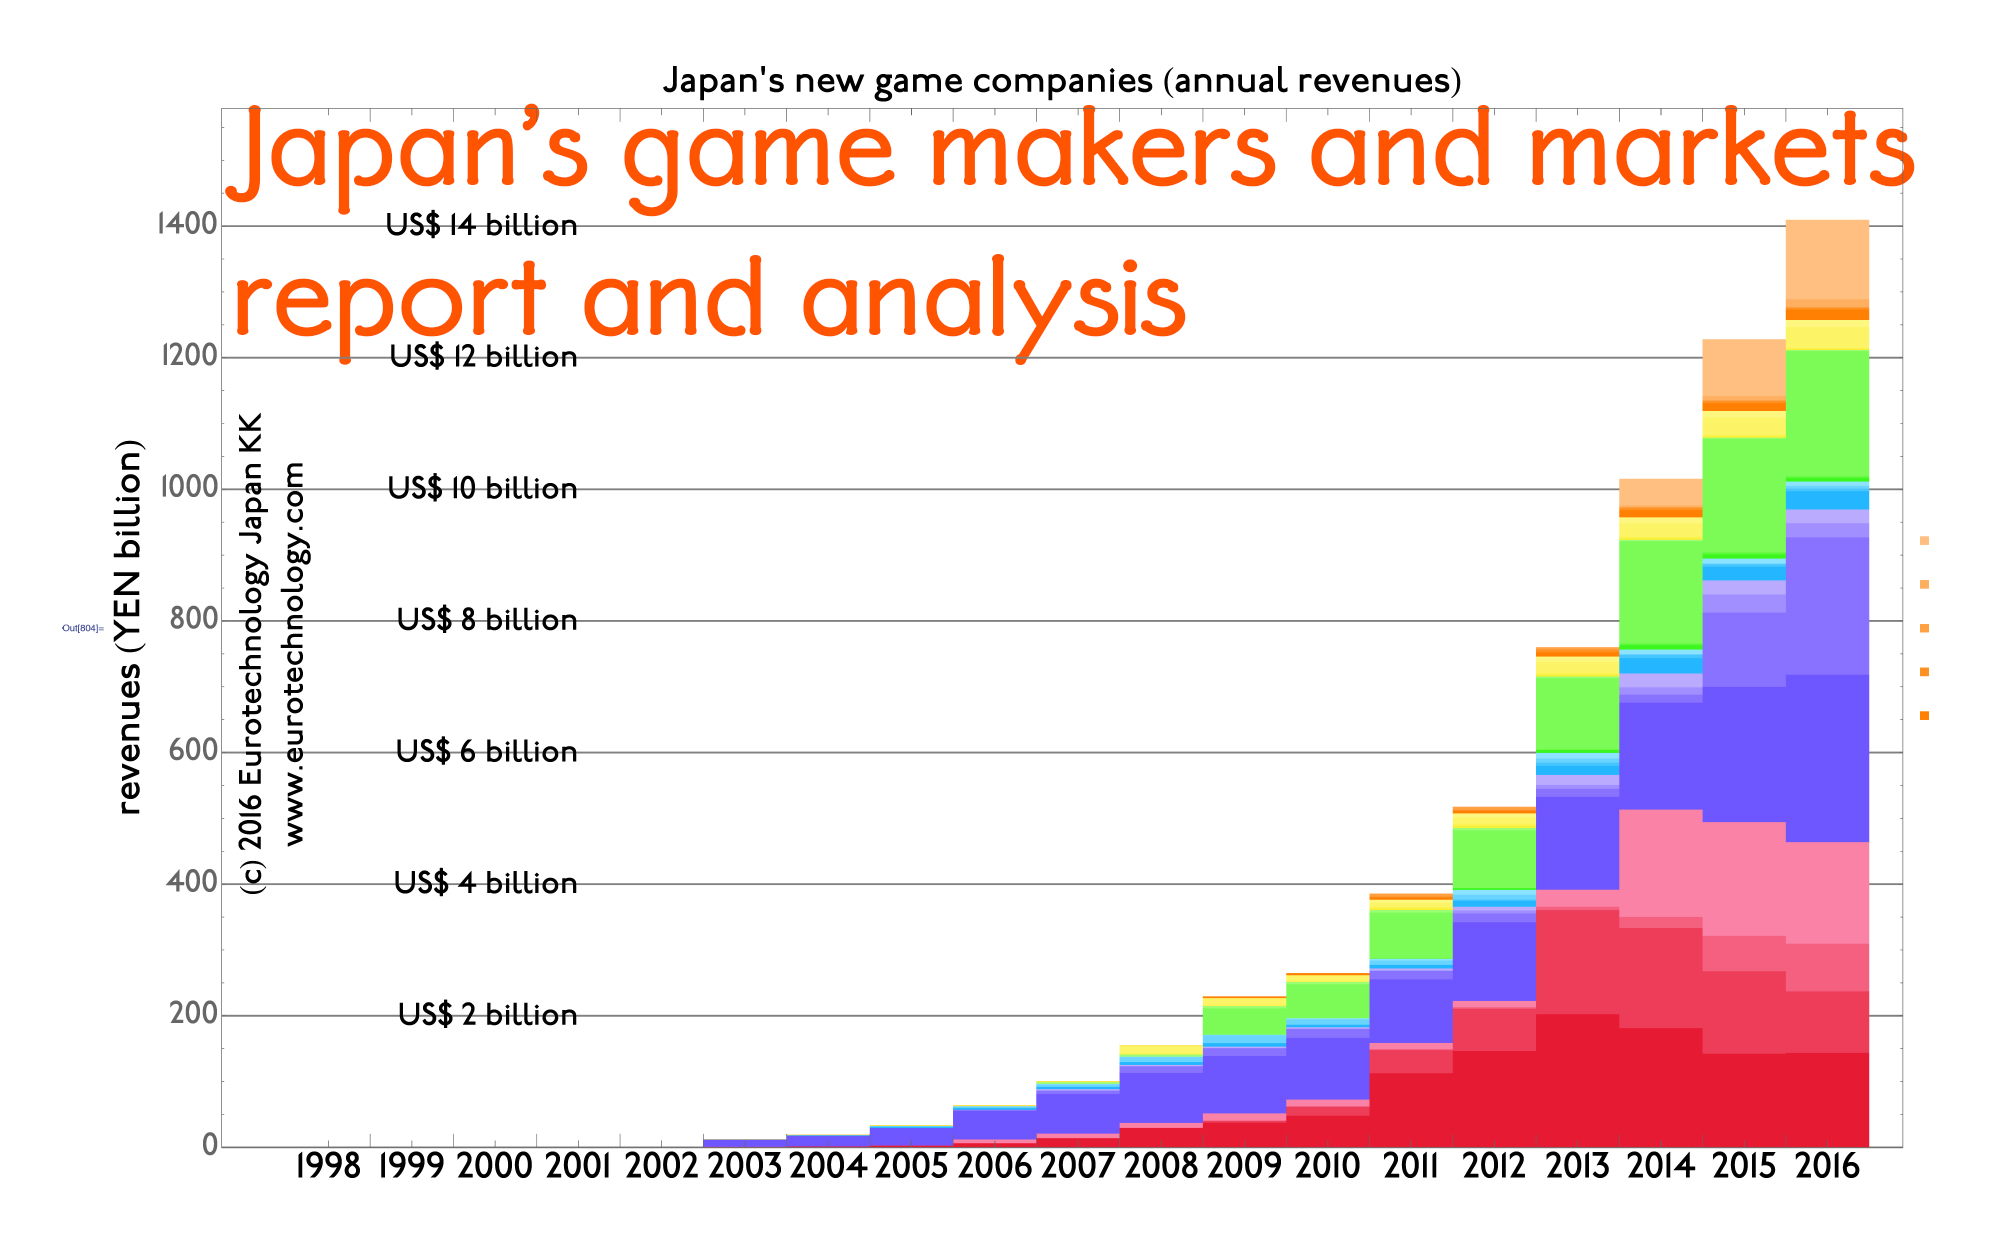 Eurotechnology report: JAPAN’S GAME MAKERS AND MARKETS – DISRUPTION BY SMARTPHONE GAMES